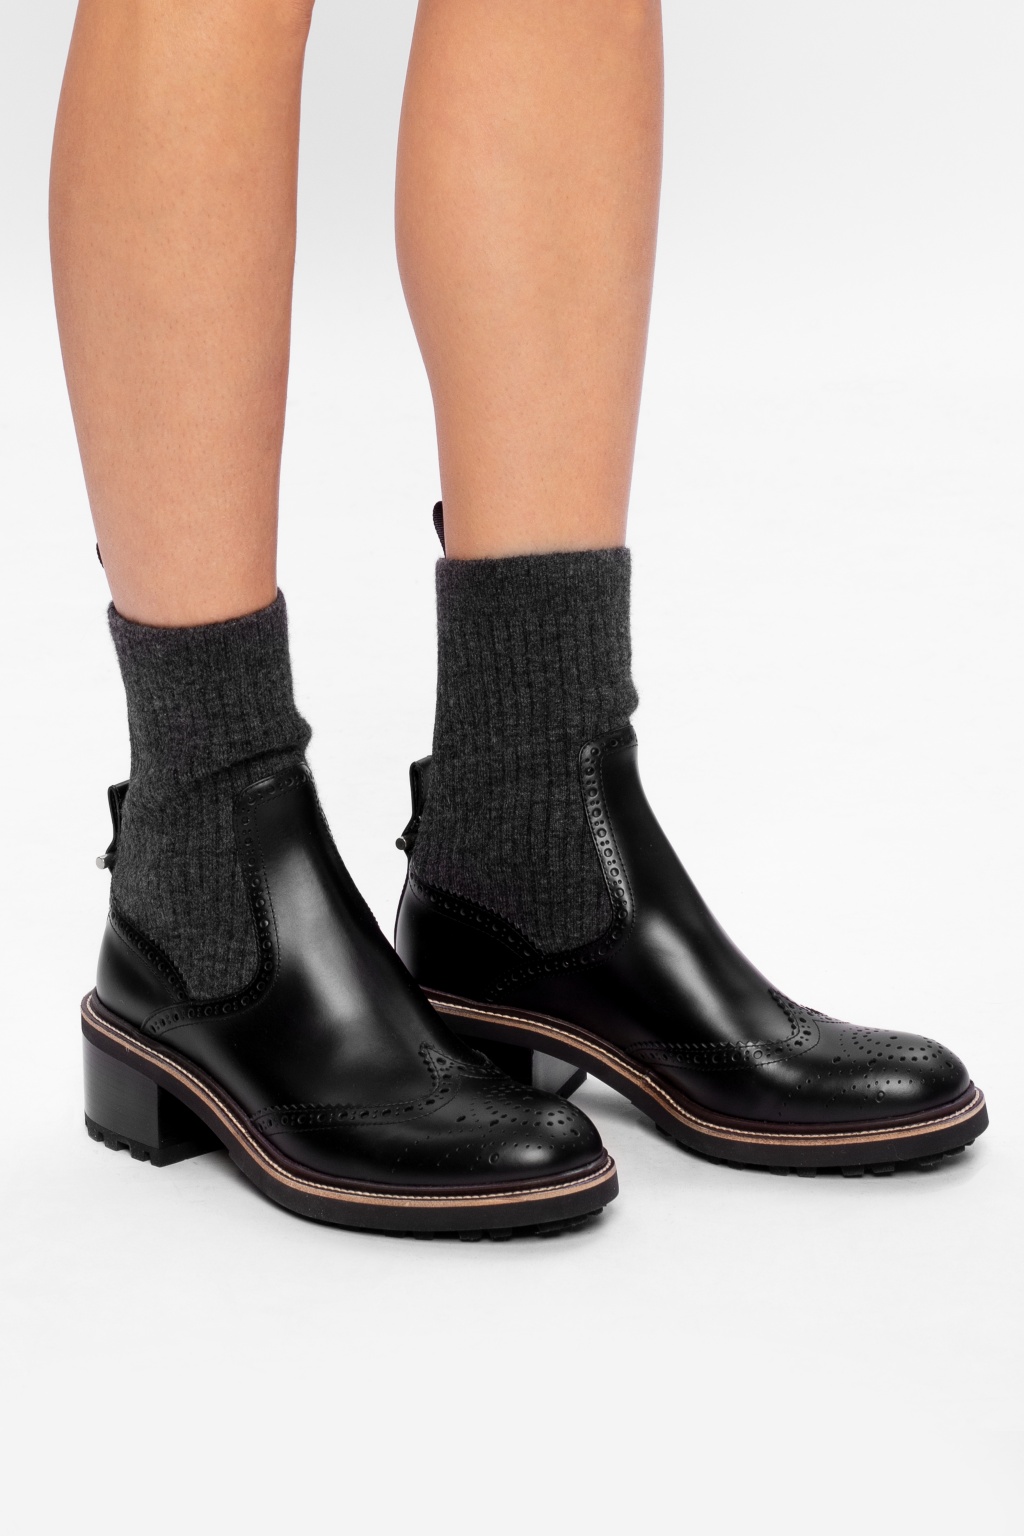 Chloé ‘Franne’ heeled sock ankle boots